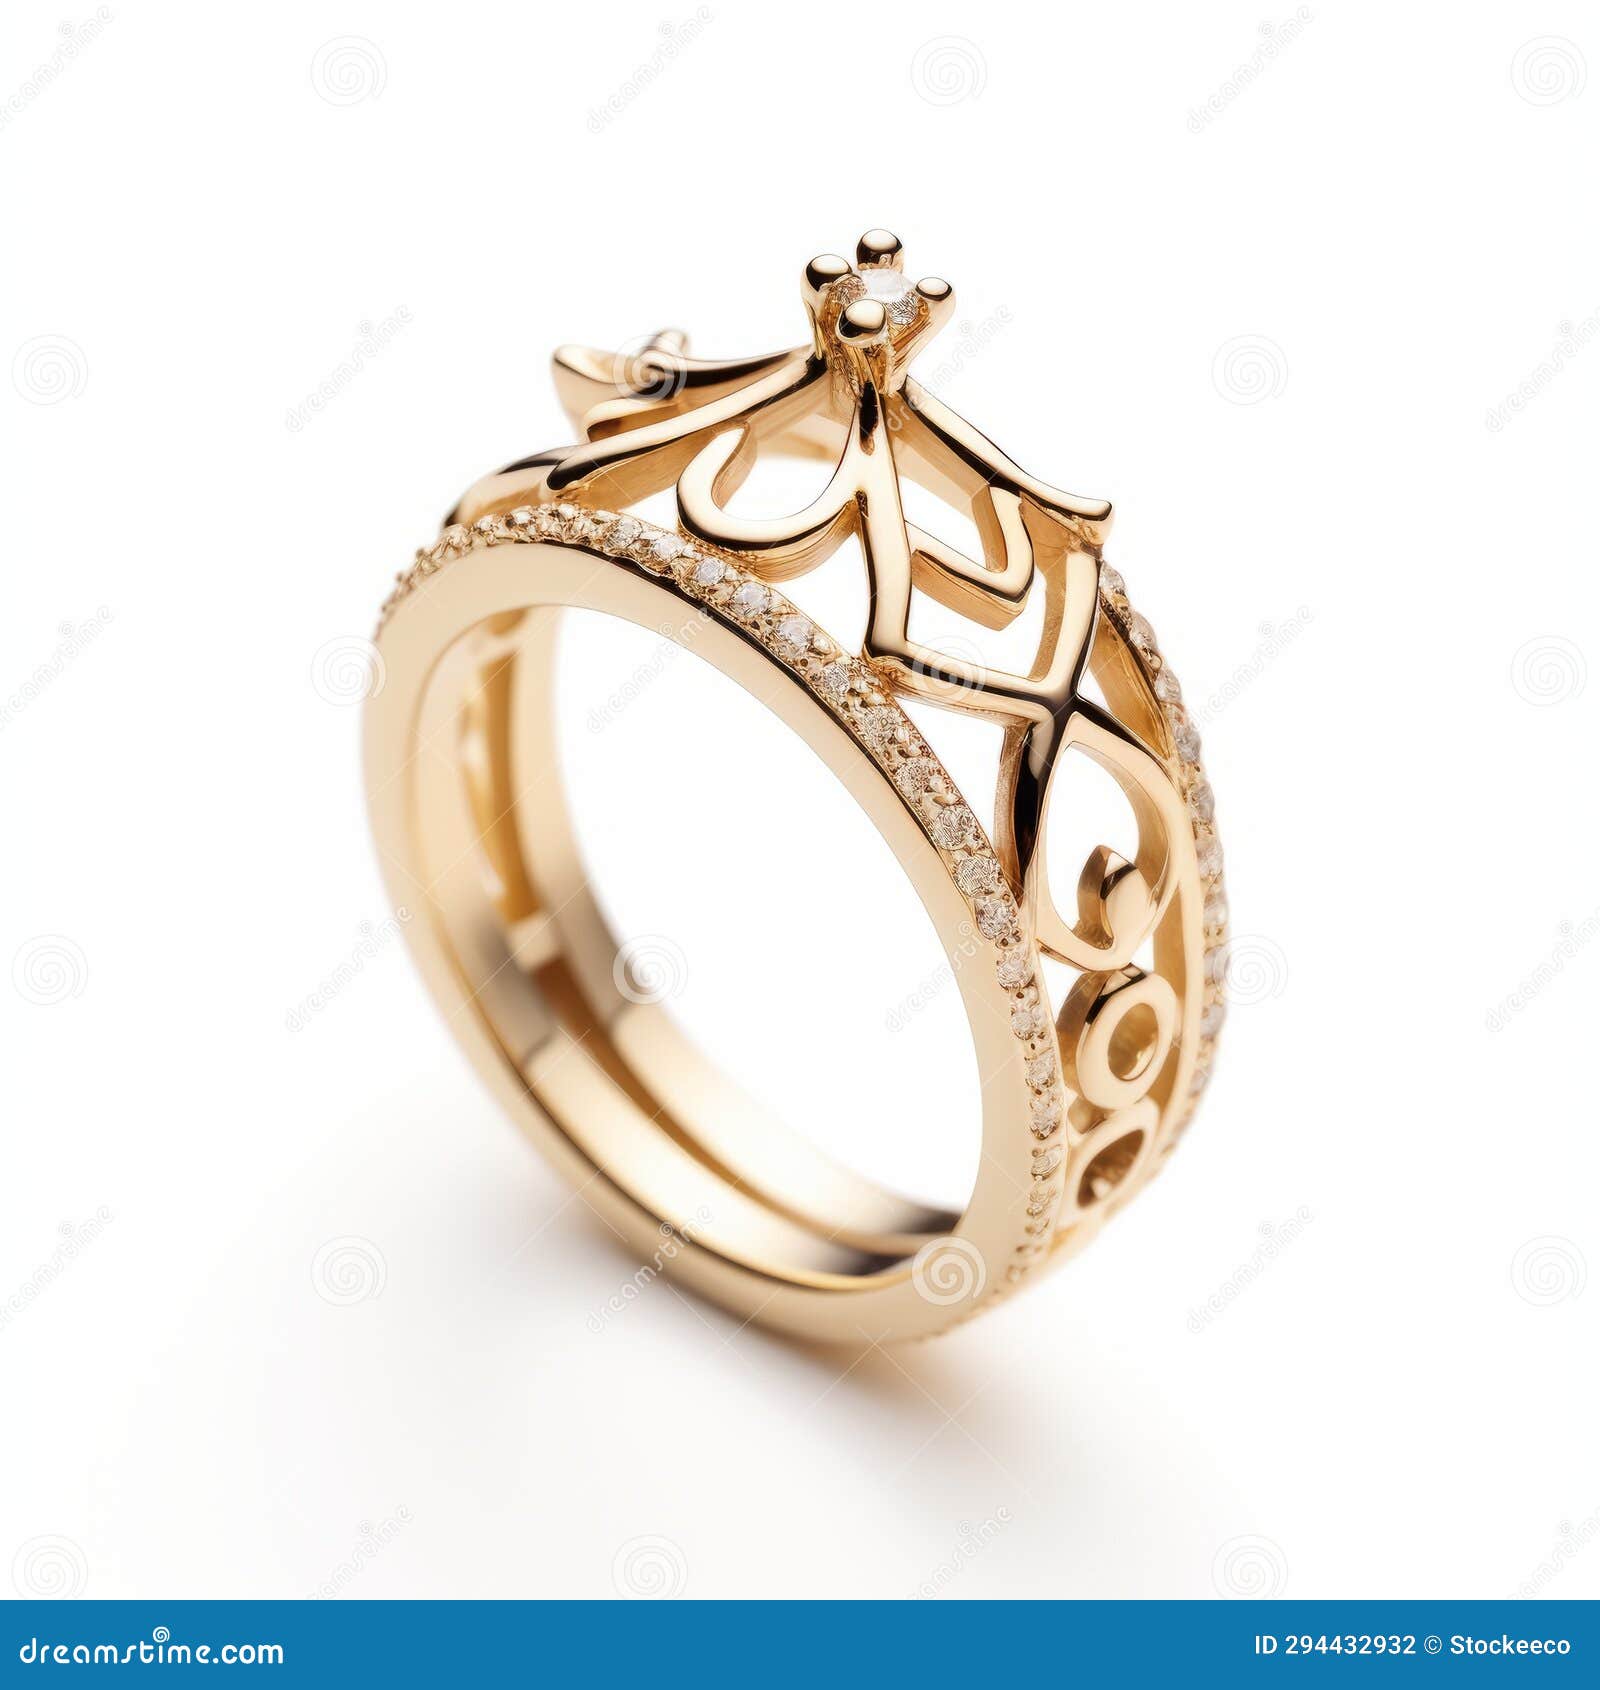 Buy Queen Crown Ring Online In India - Etsy India